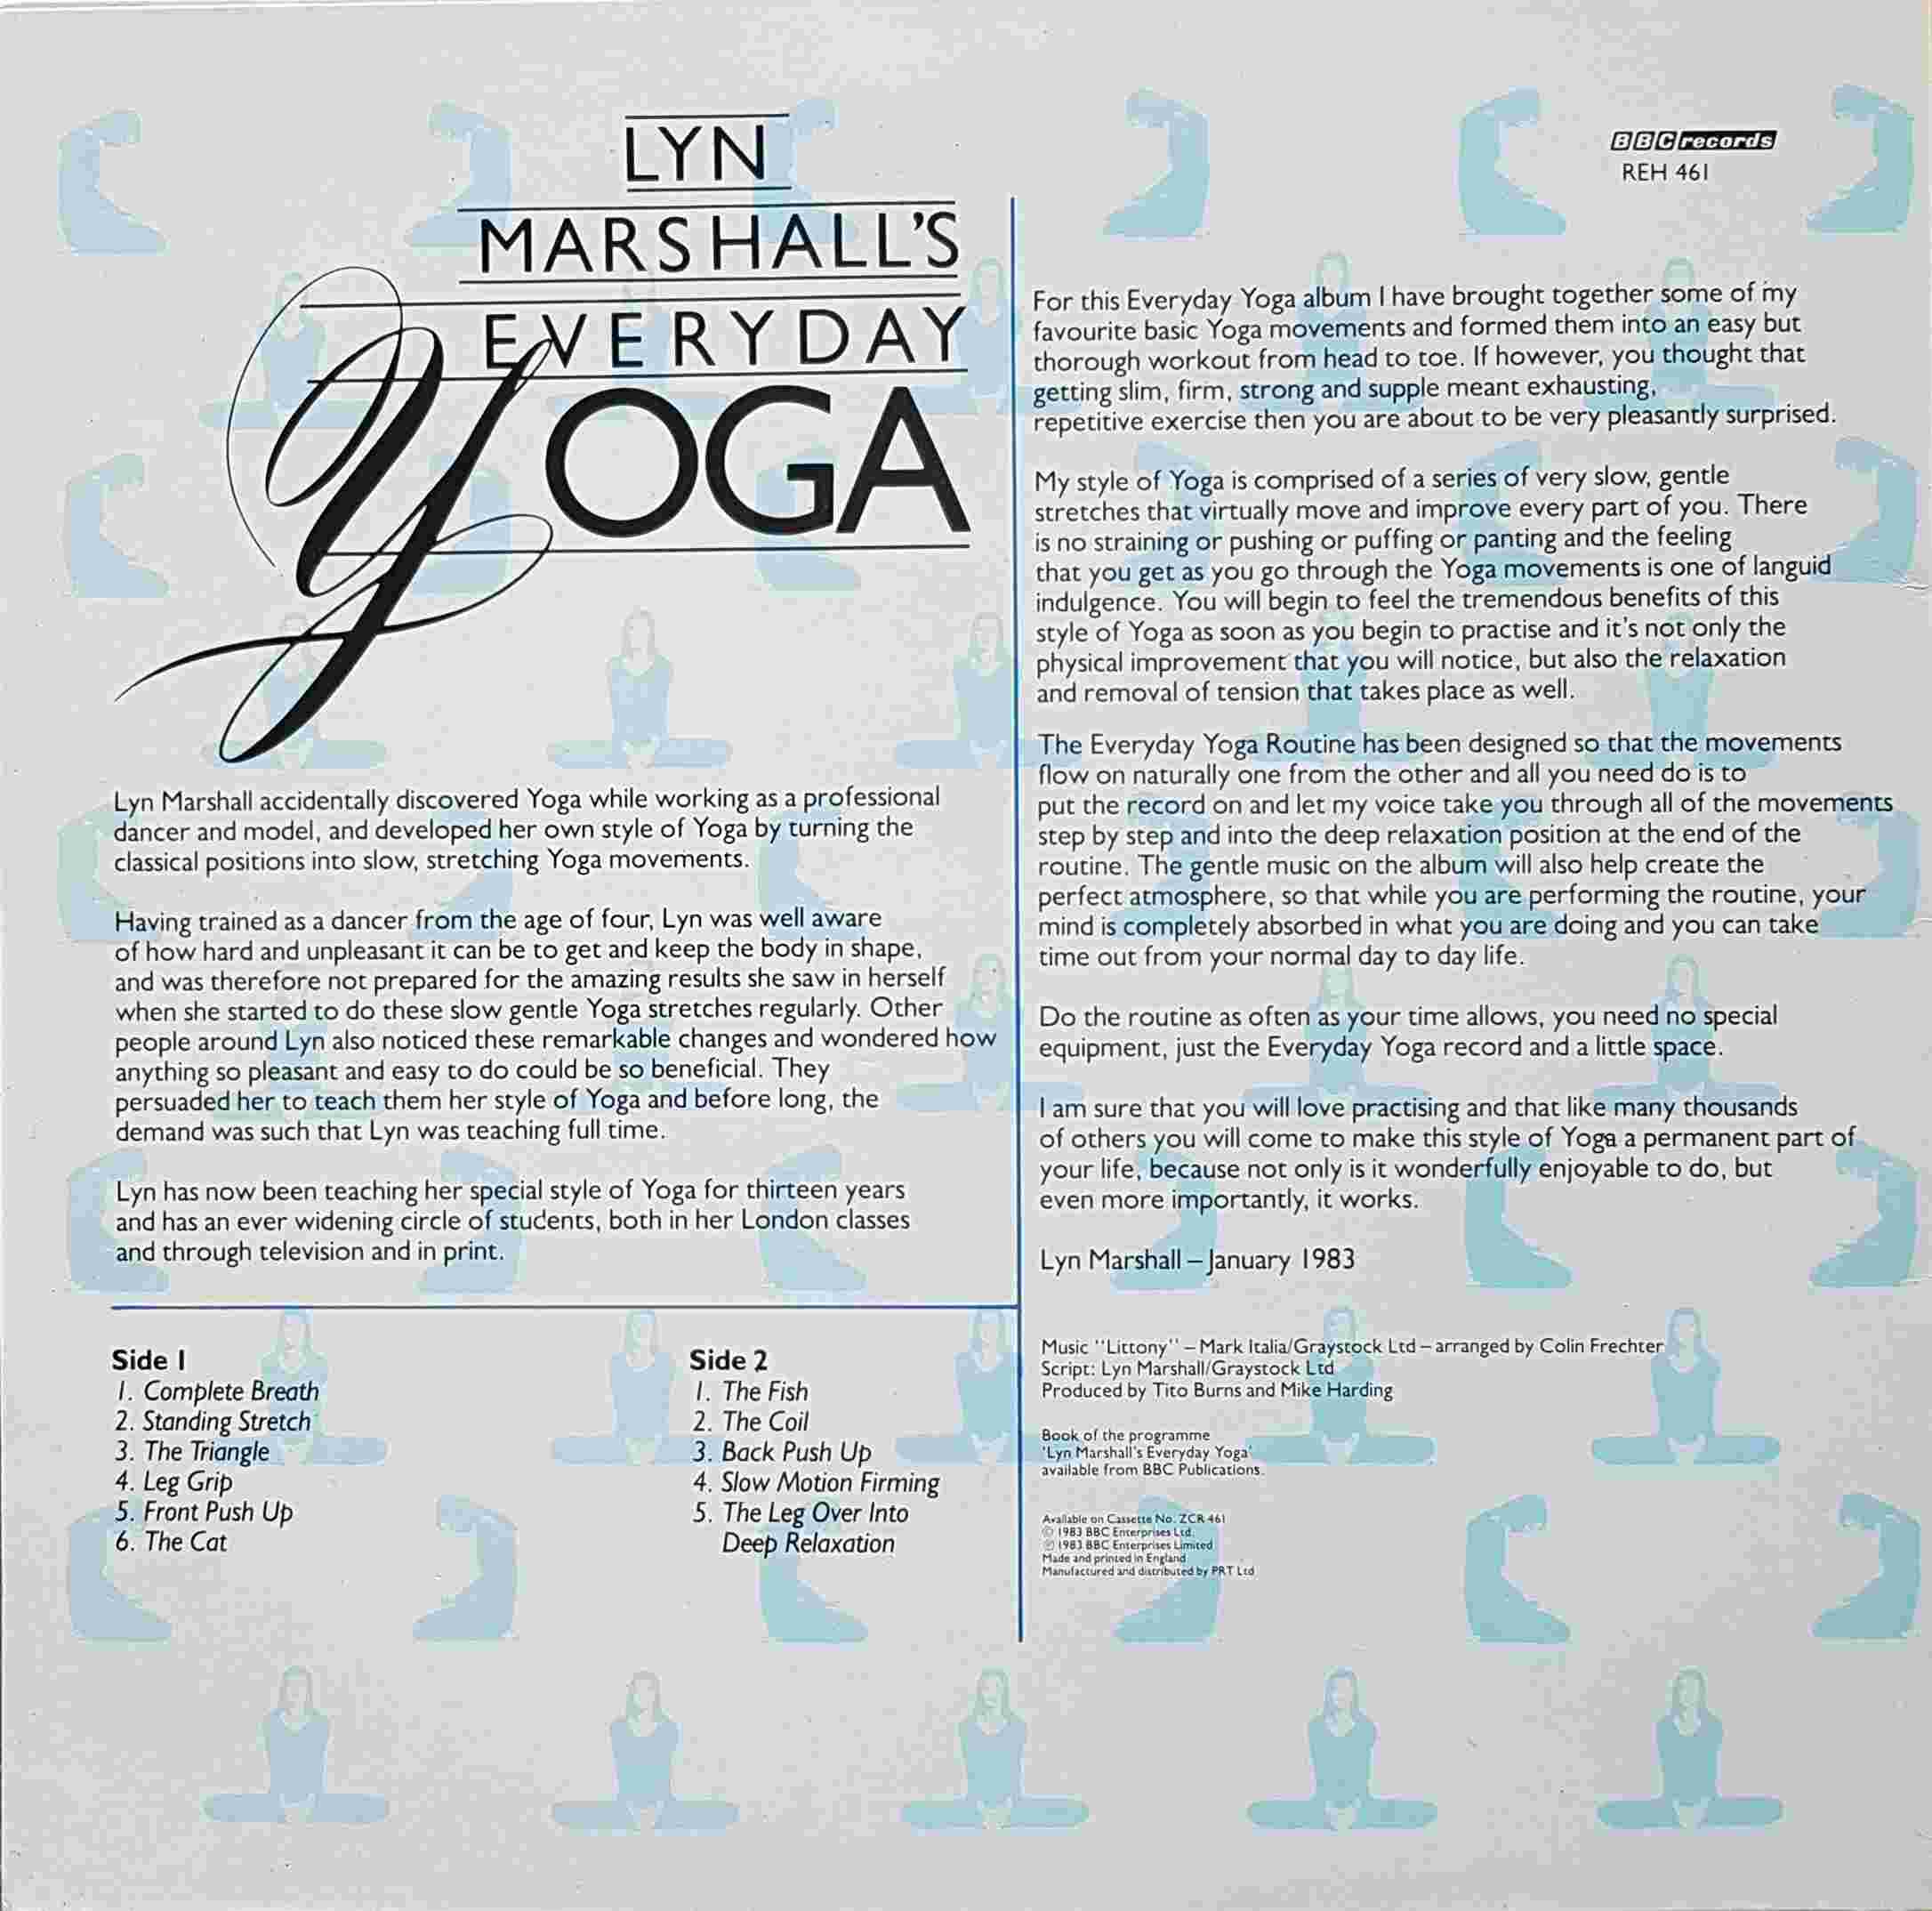 Picture of REH 461 Lyn marshall's everyday yoga by artist Lyn marshall from the BBC records and Tapes library